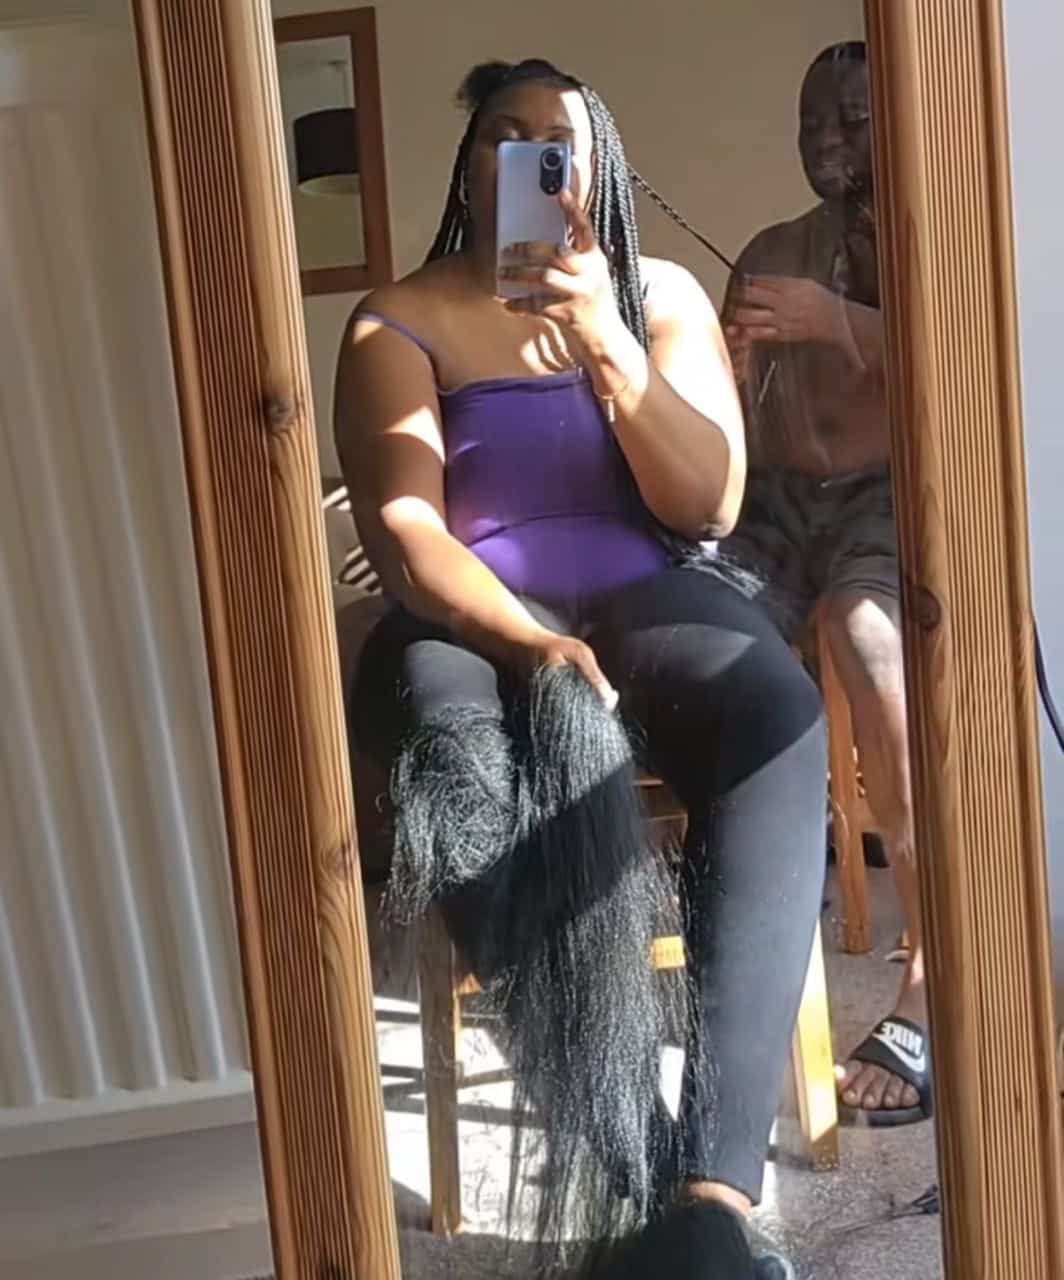 Woman saves £100 in UK as husband neatly braids her hair